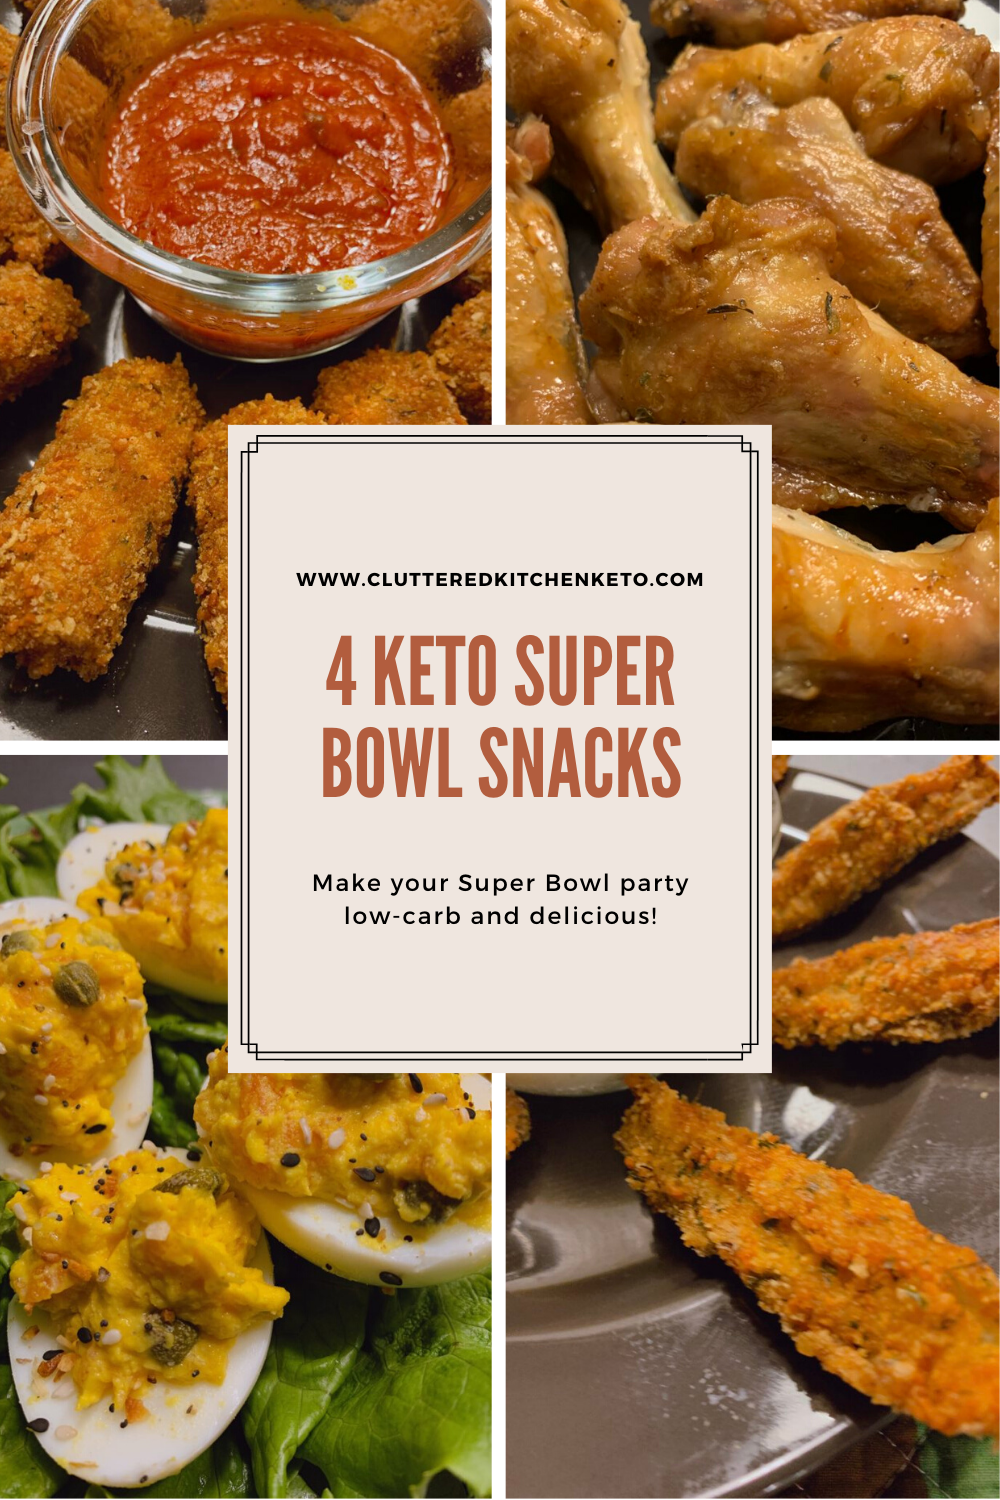 4 Awesome Keto Super Bowl Snacks - Cluttered Kitchen Keto